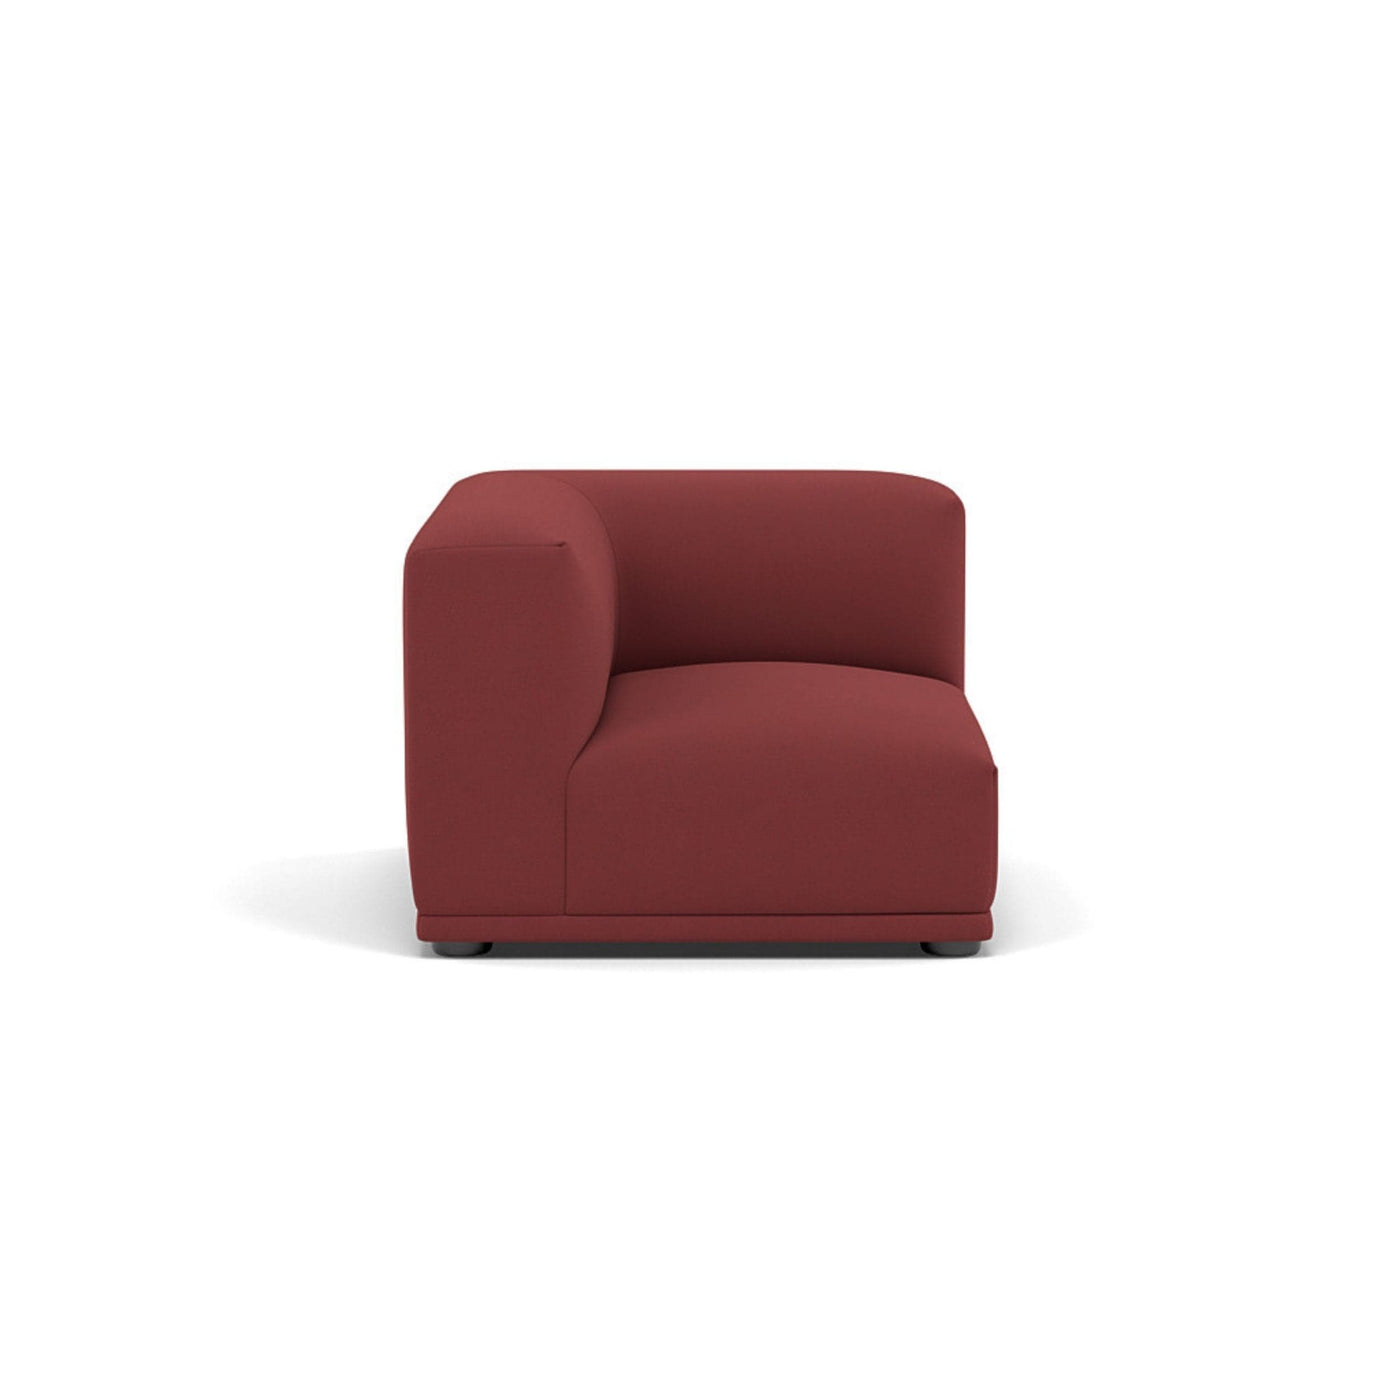 Muuto Connect Modular Sofa System, module e, corner, rime 591 red fabric. Available from someday designs. #colour_rime-591